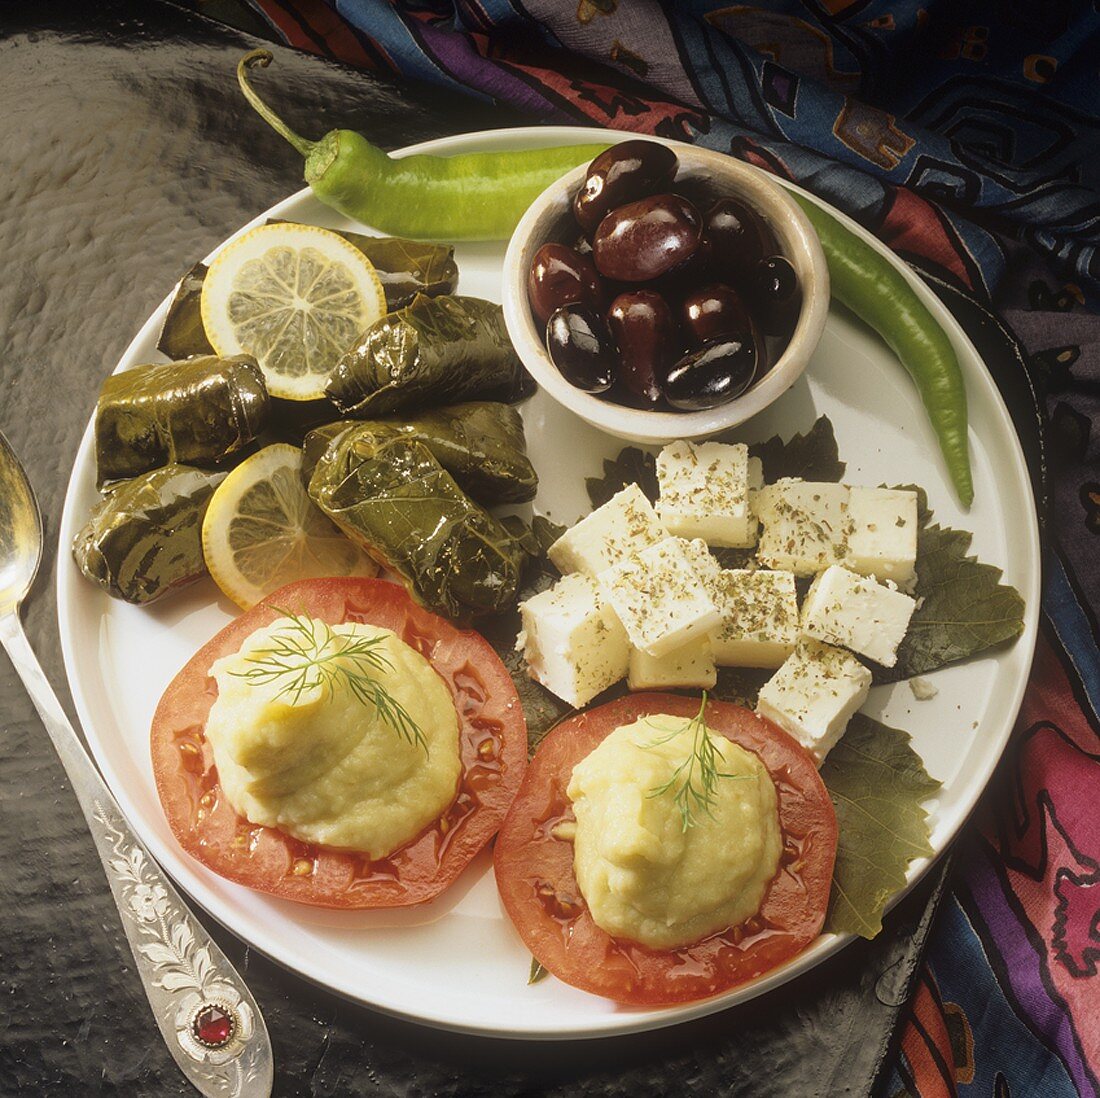 Appetiser plate with stuffed vine leaves, sheep's cheese etc.